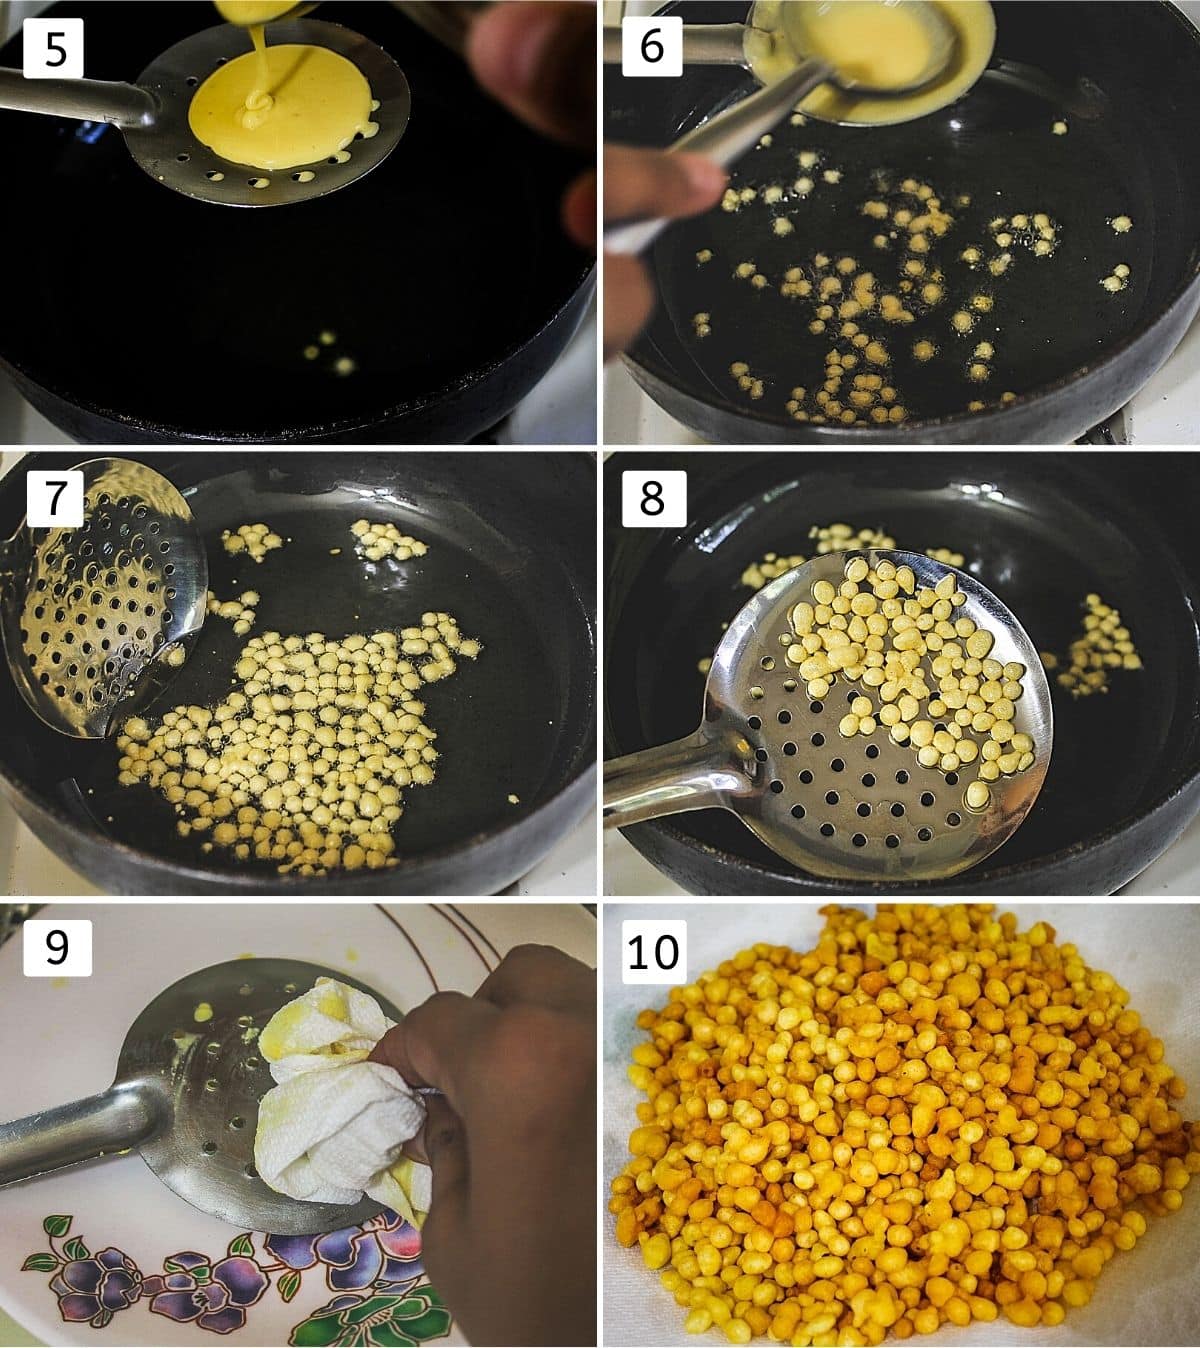 Collage of 6 images showing making boondi into oil, frying, cleaning ladle and all fried boondi on plate